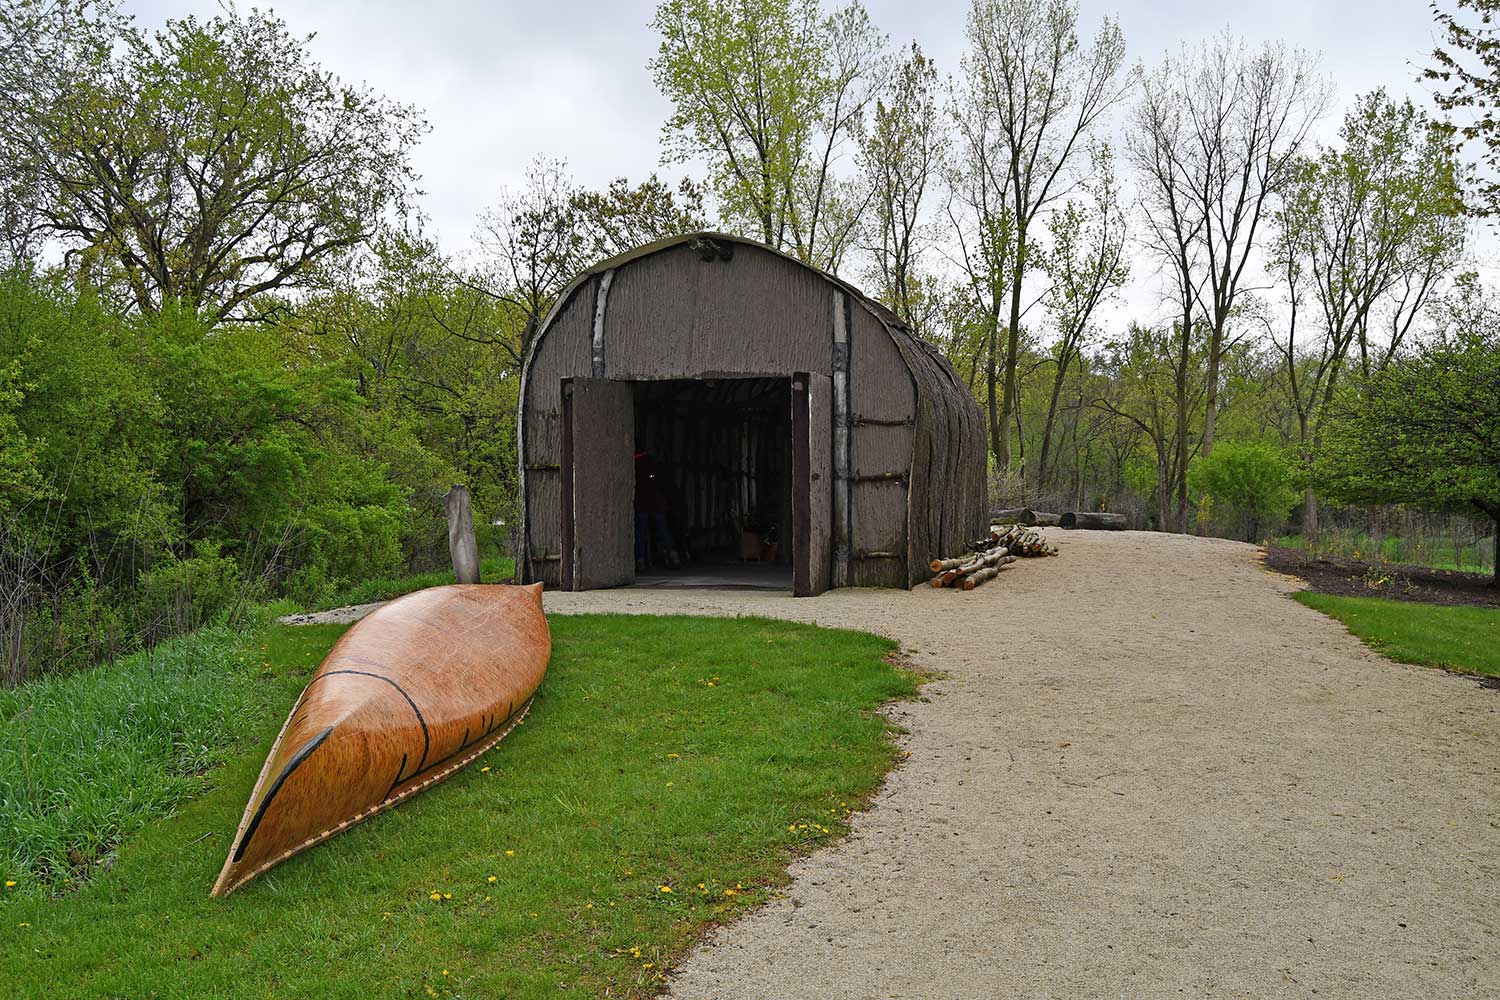 The exterior of a Native American longhouse with a canoe on the ground outside.